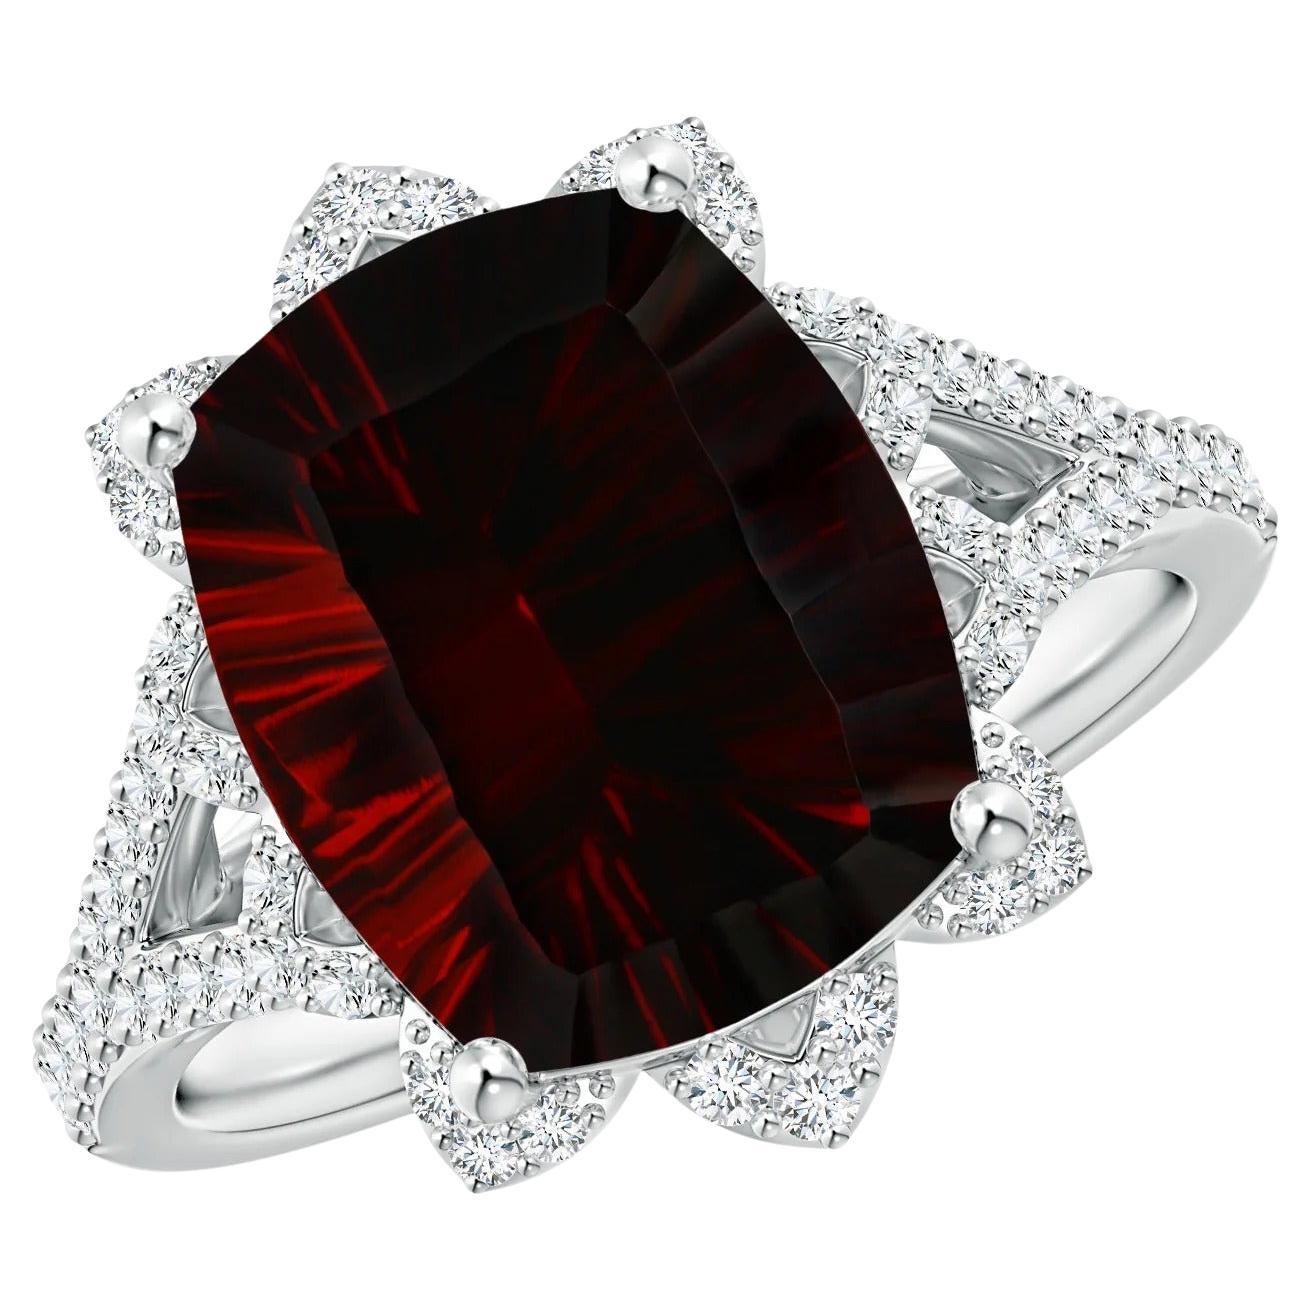 ANGARA Vintage Style GIA Certified Natural Garnet Floral Halo Ring in White Gold